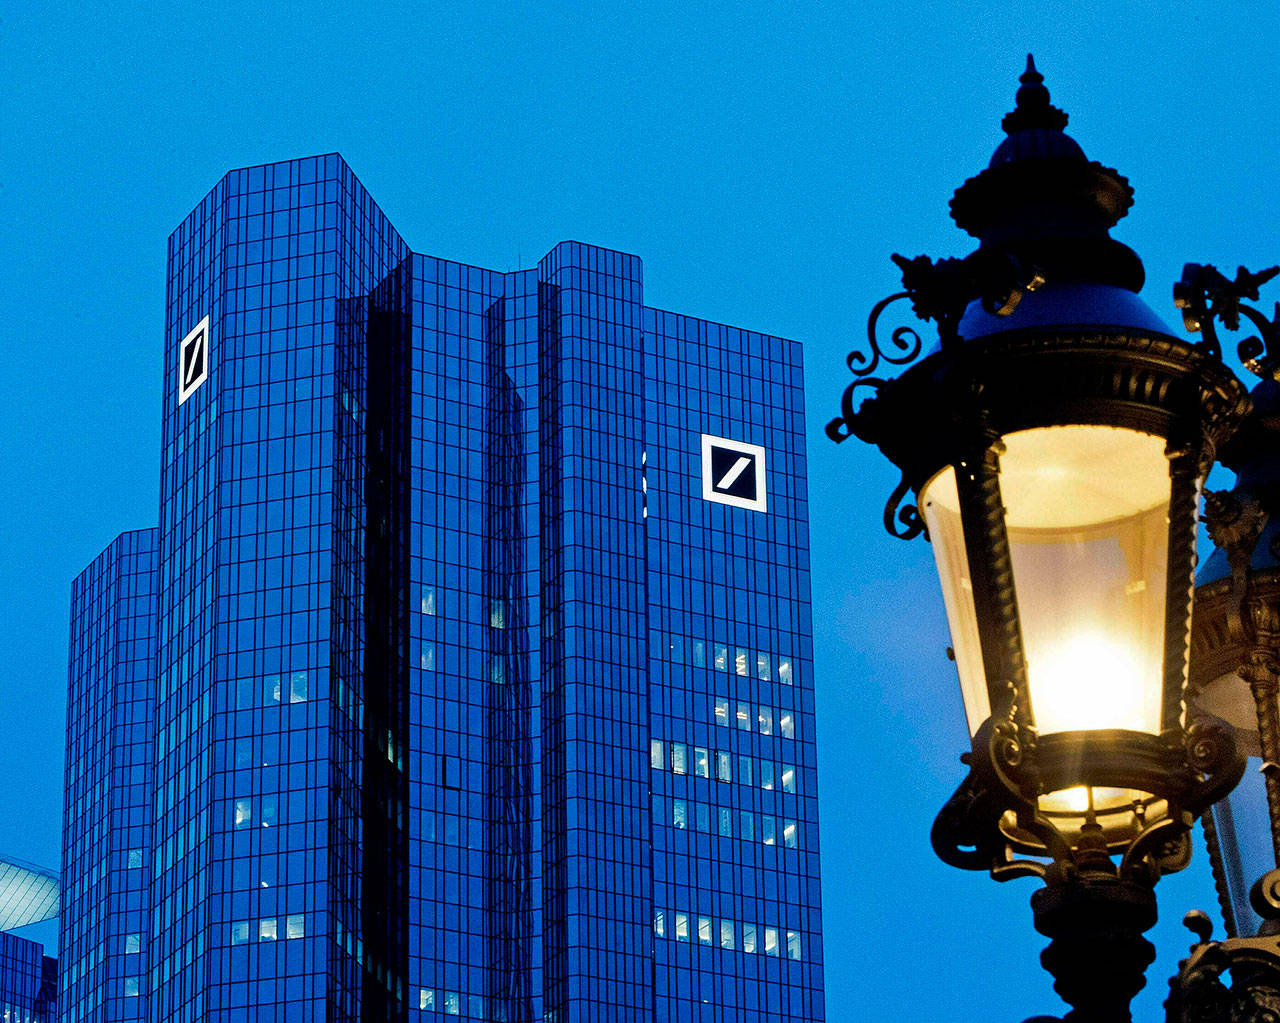 The Deutsche Bank headquarters is seen in Frankfurt, Germany. On Monday the president and three of his children filed suit in federal court in New York against Deutsche Bank and Capital One. (AP Photo/Michael Probst)